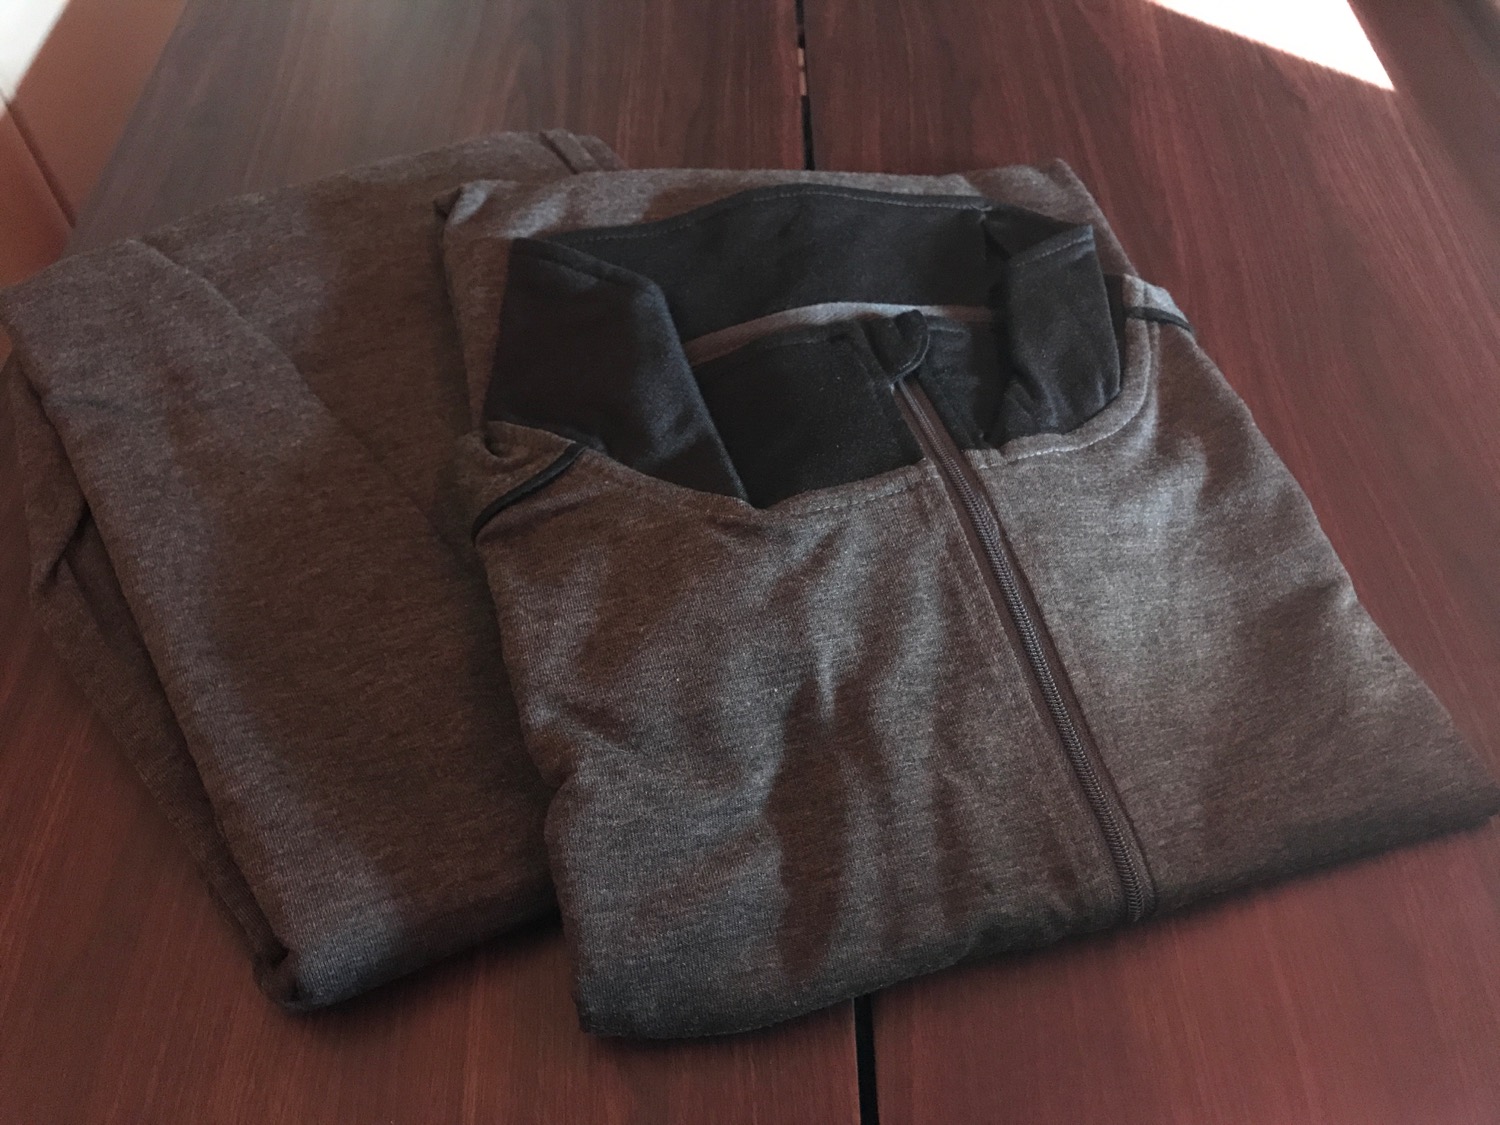 a folded grey sweatshirts on a wooden surface